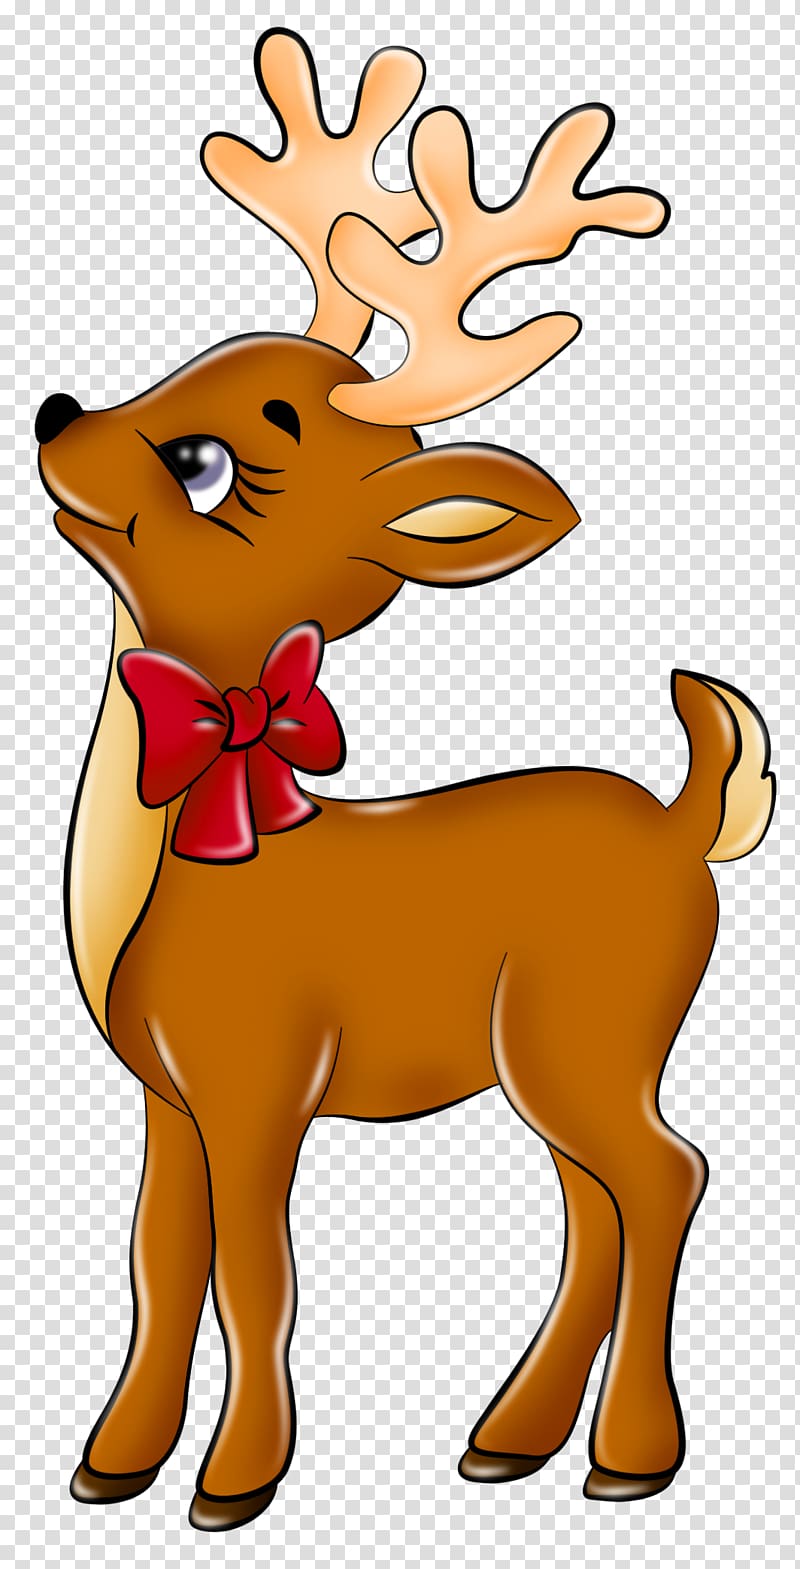 Rudolph Santa Claus's reindeer , Cute Reindeer , deer with red bow transparent background PNG clipart